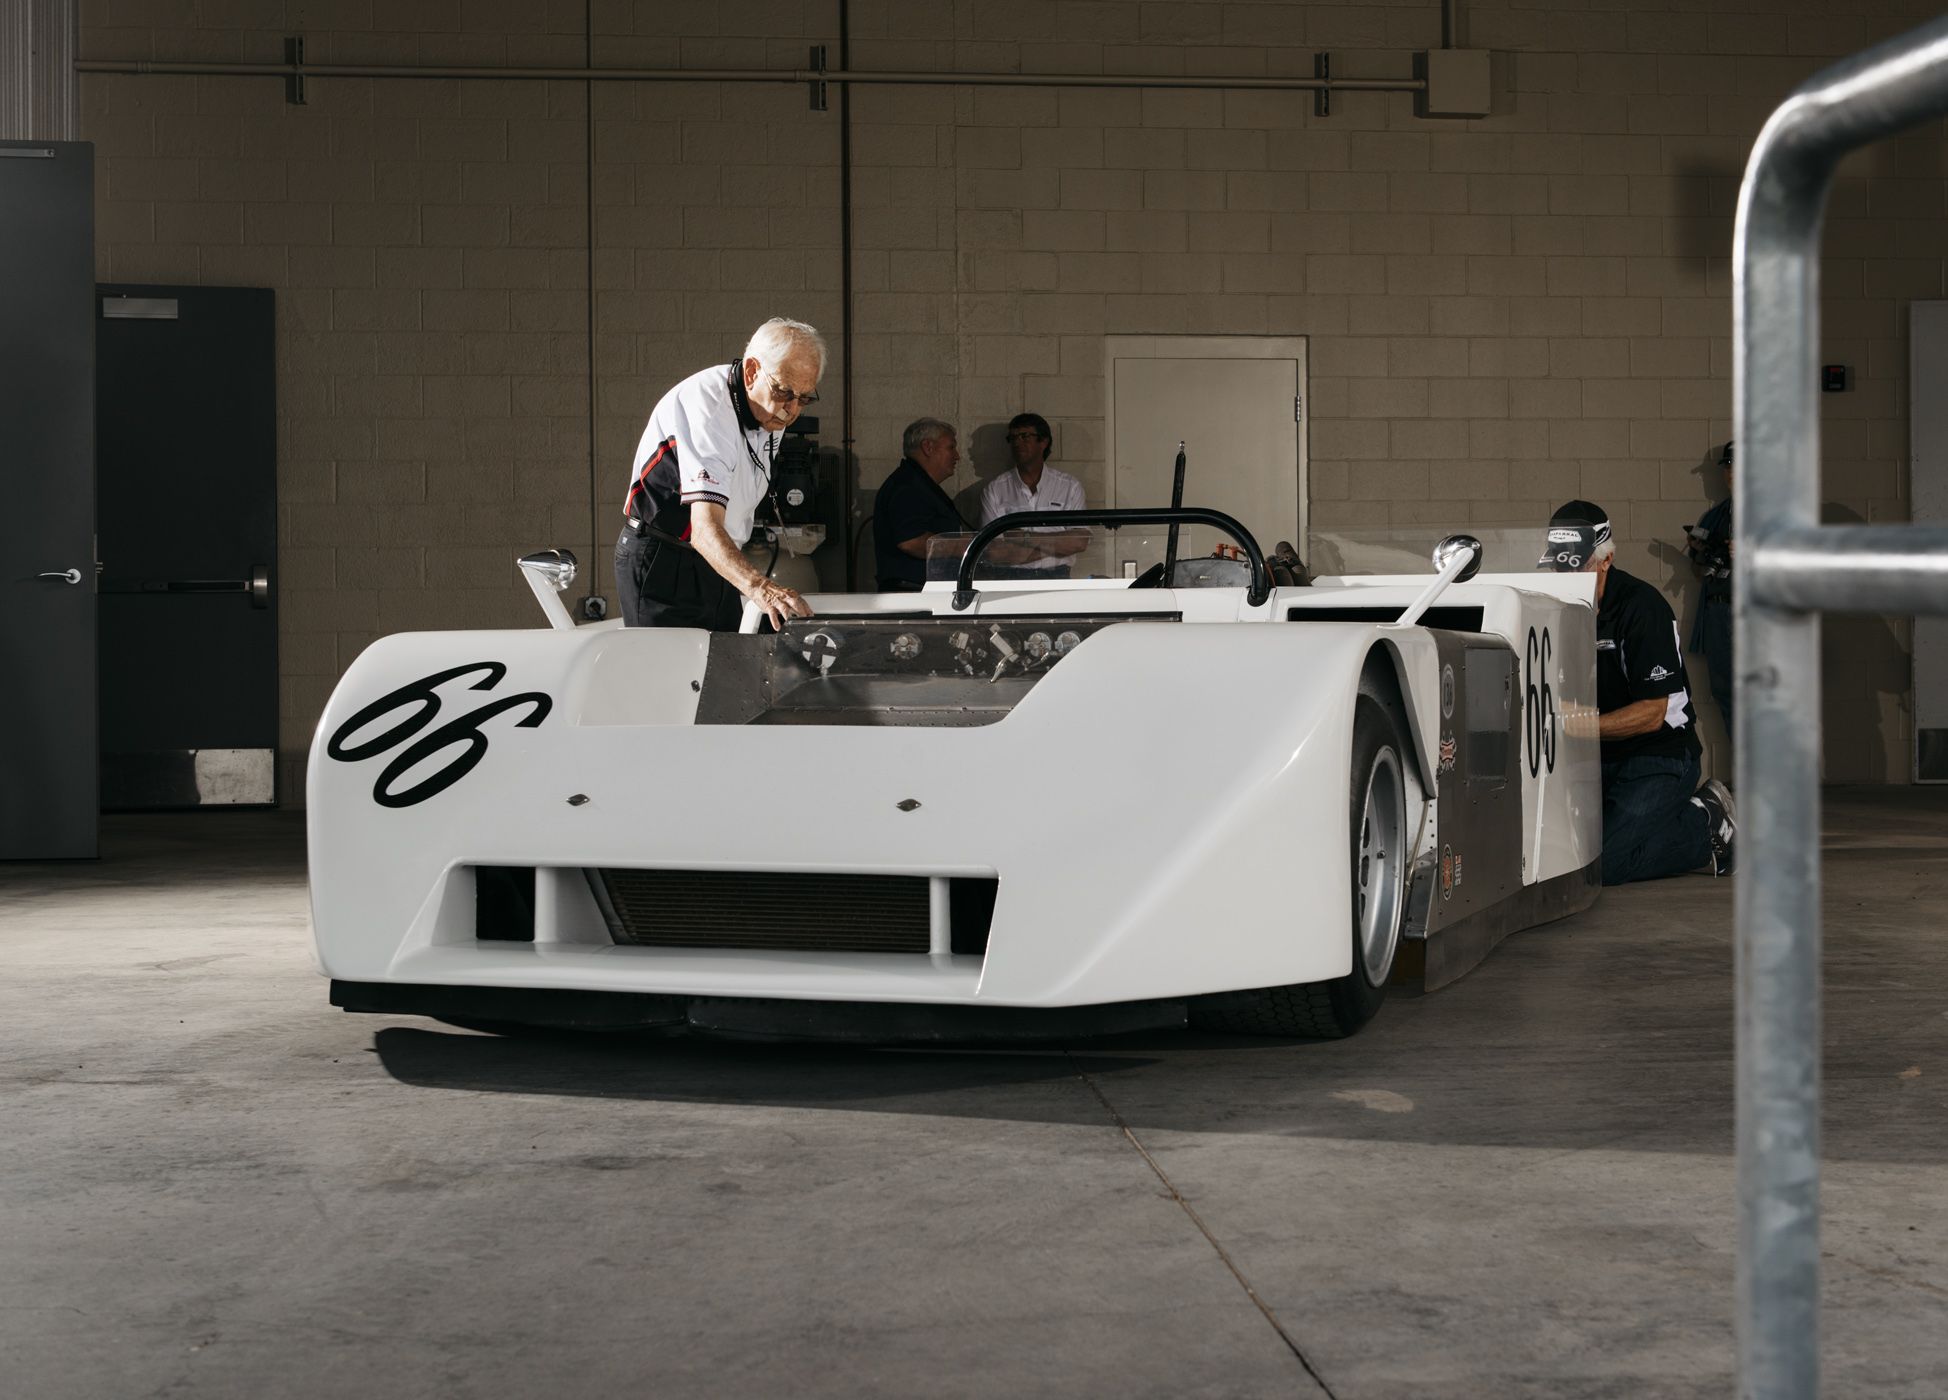 Jim Hall and the Chaparral 2J: The Story of America's Most Extreme Race Car